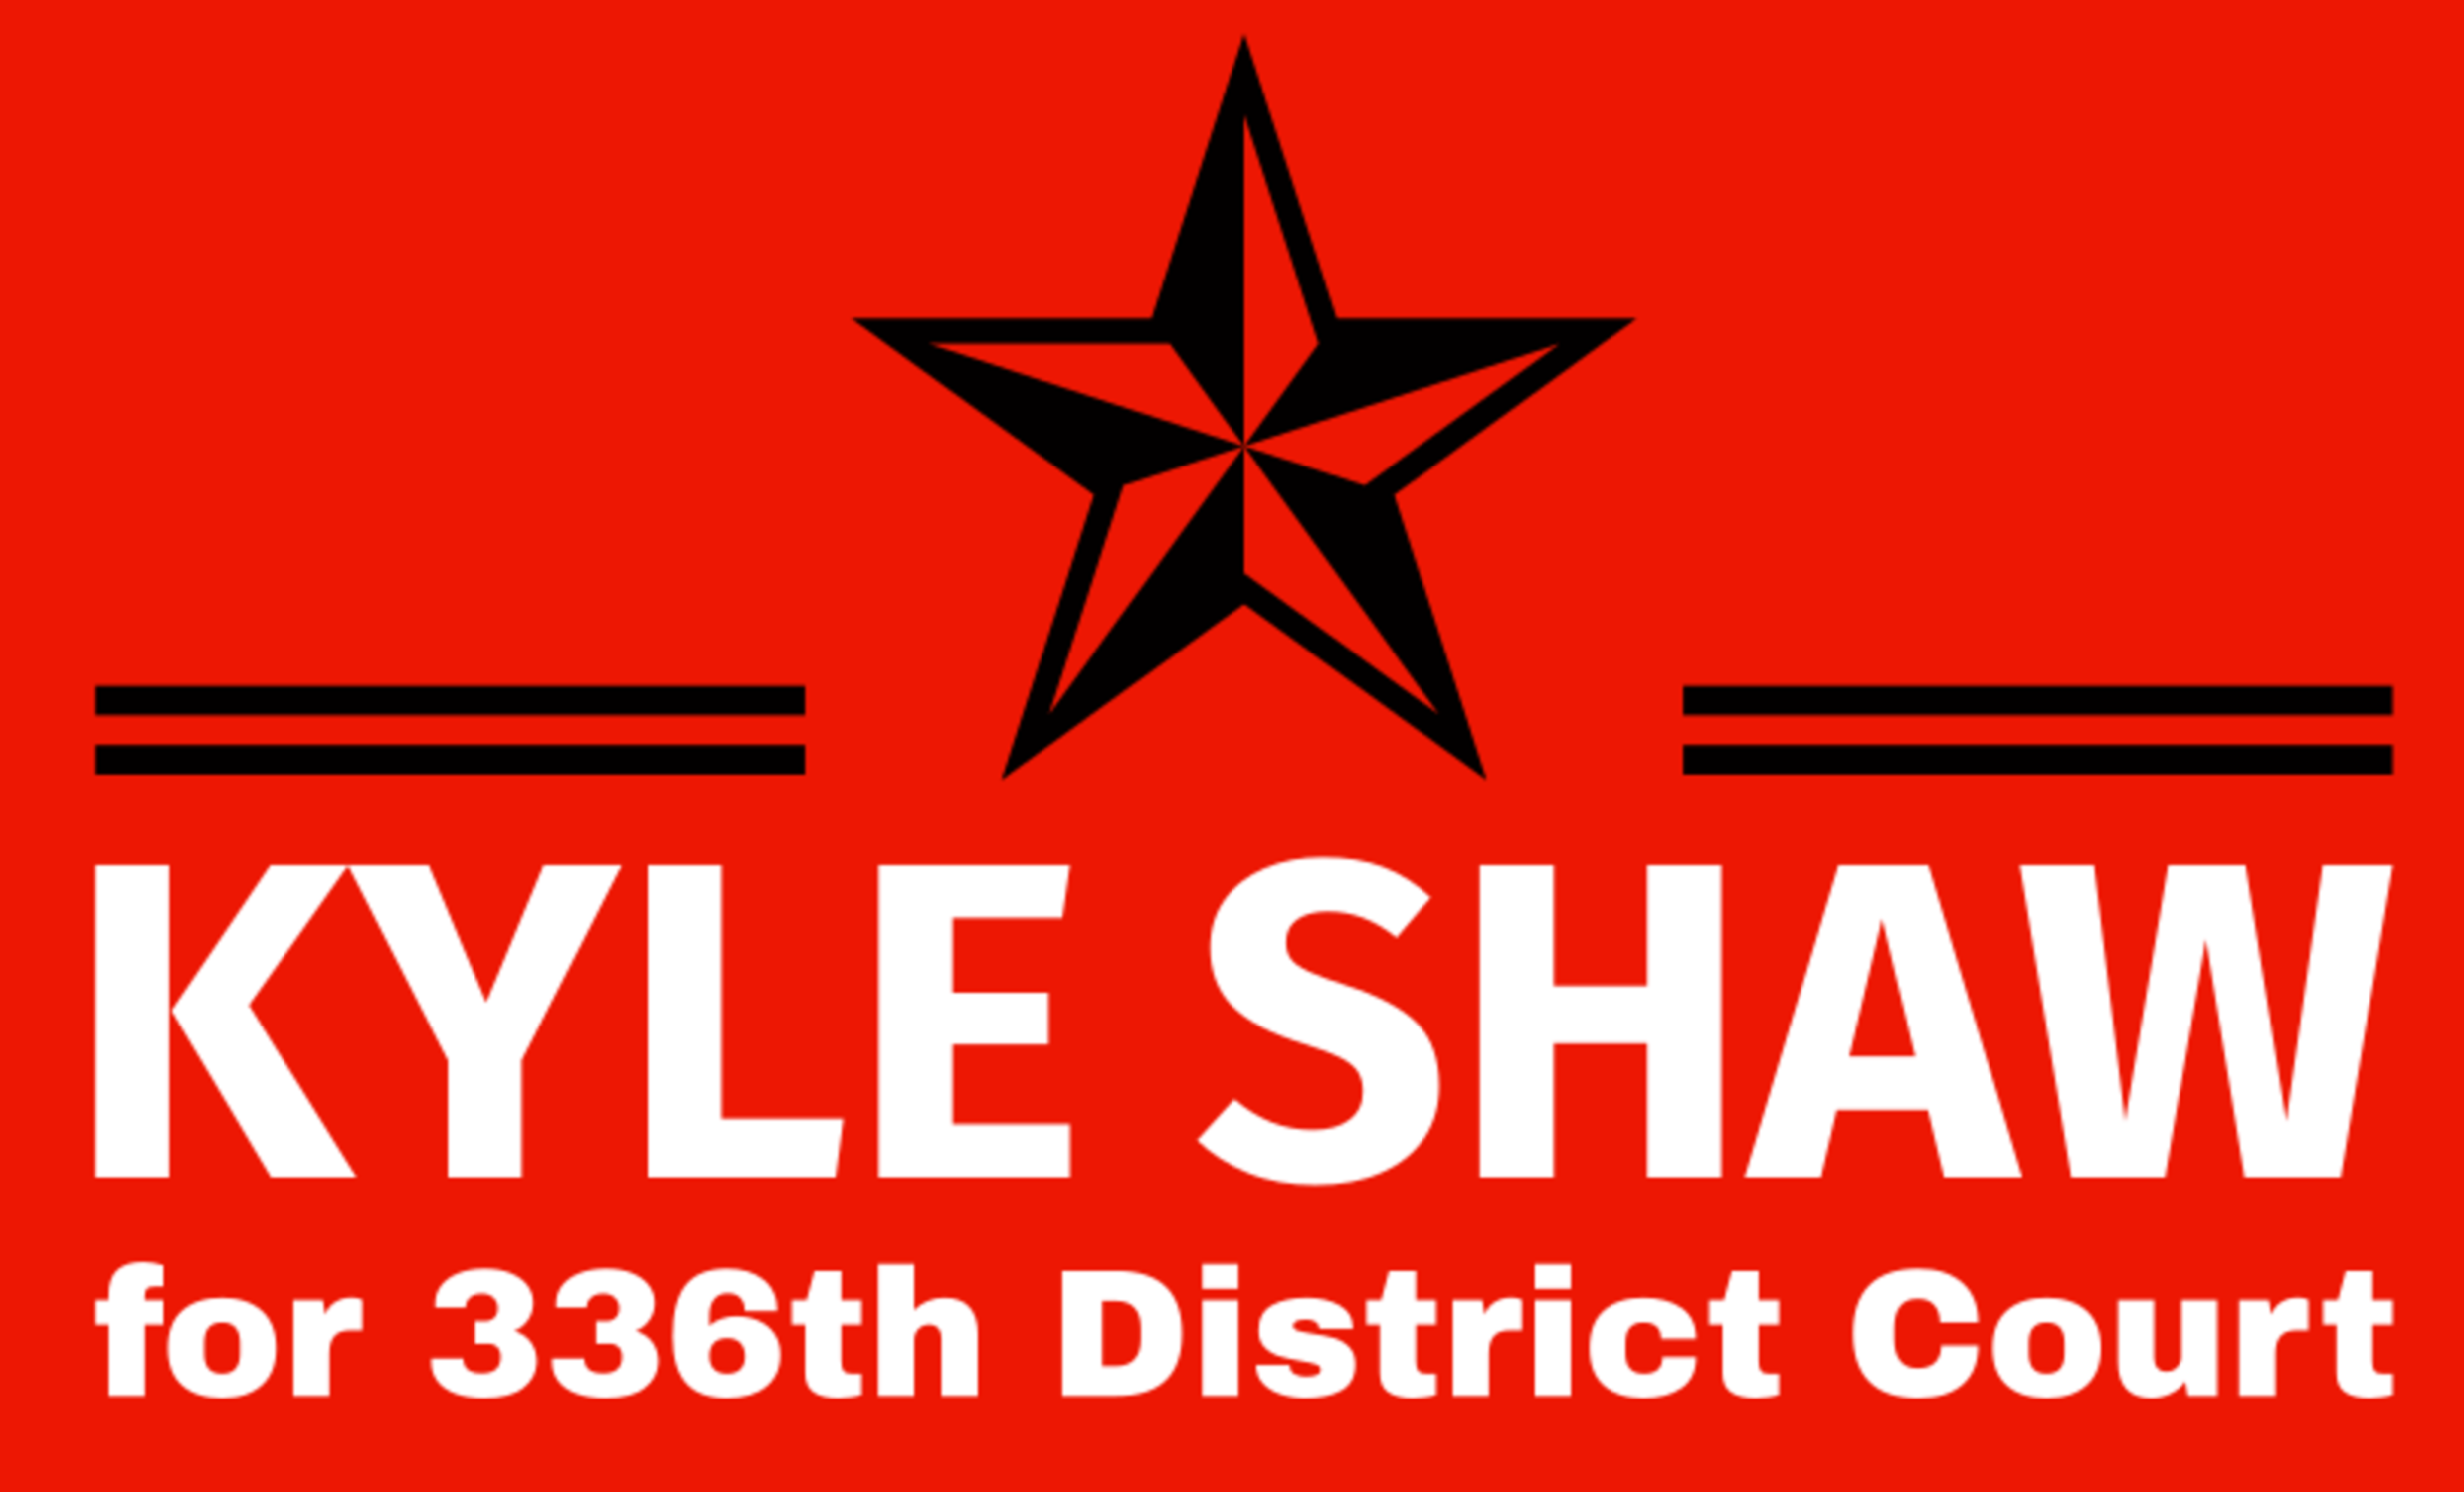 Kyle Shaw Campaign News